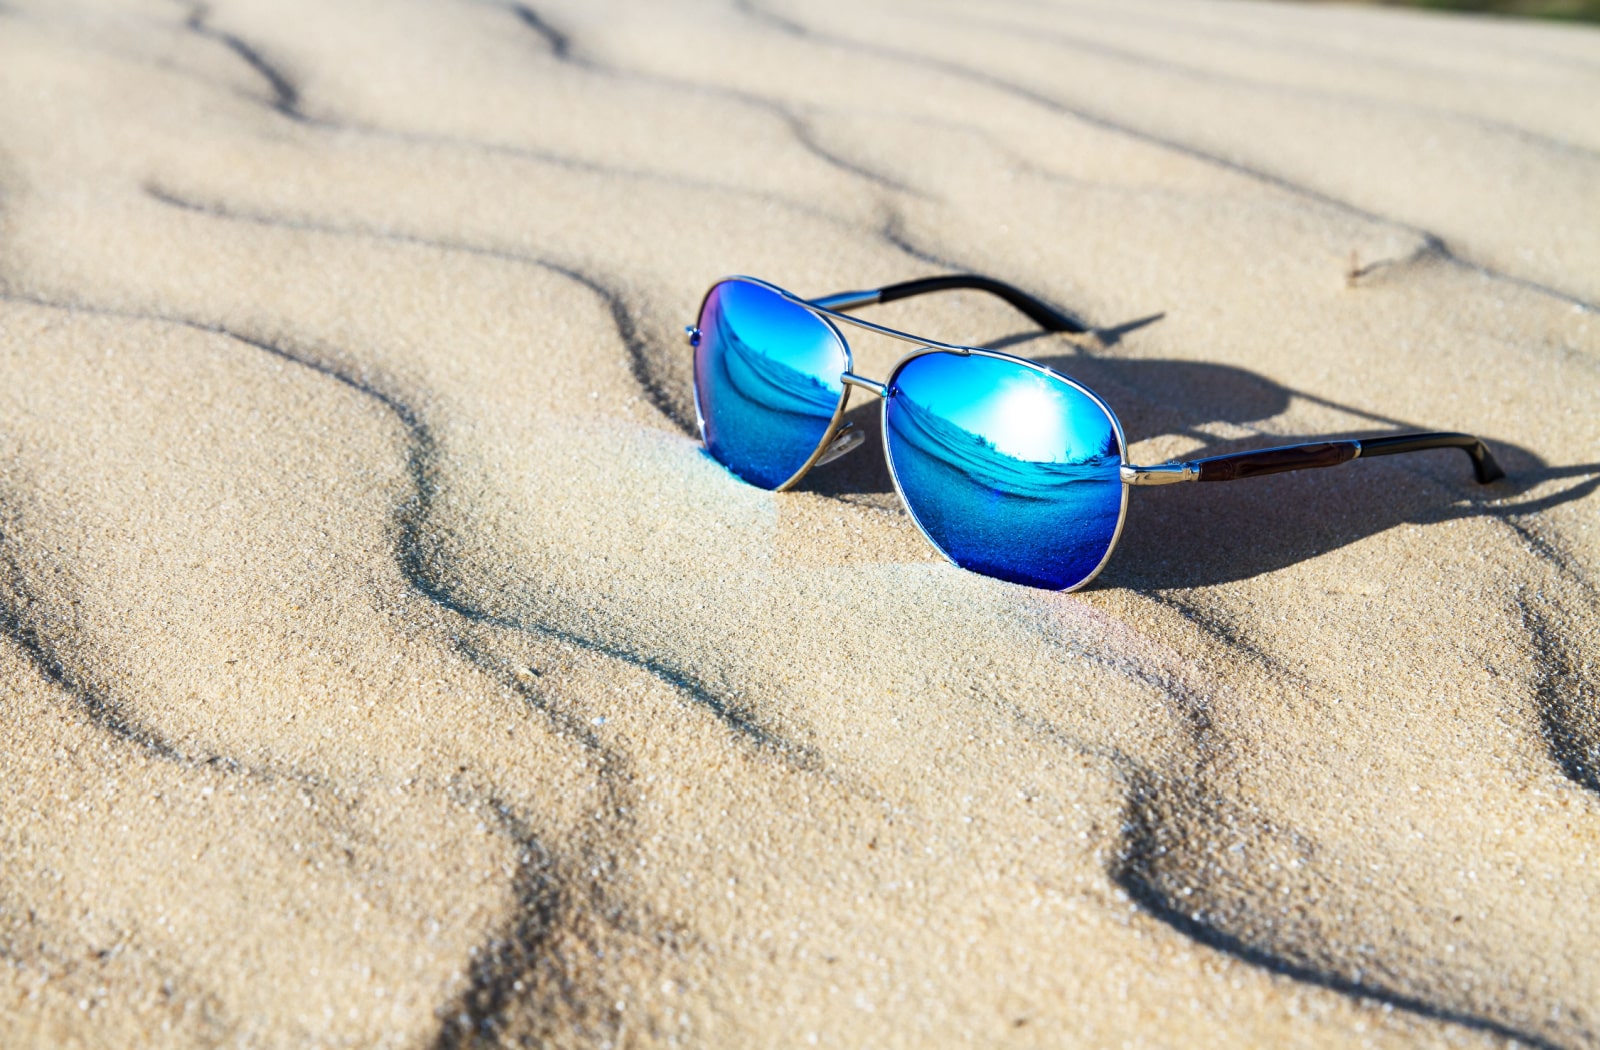 A pair of polarized sunglasses sitting in the sand on a beach.